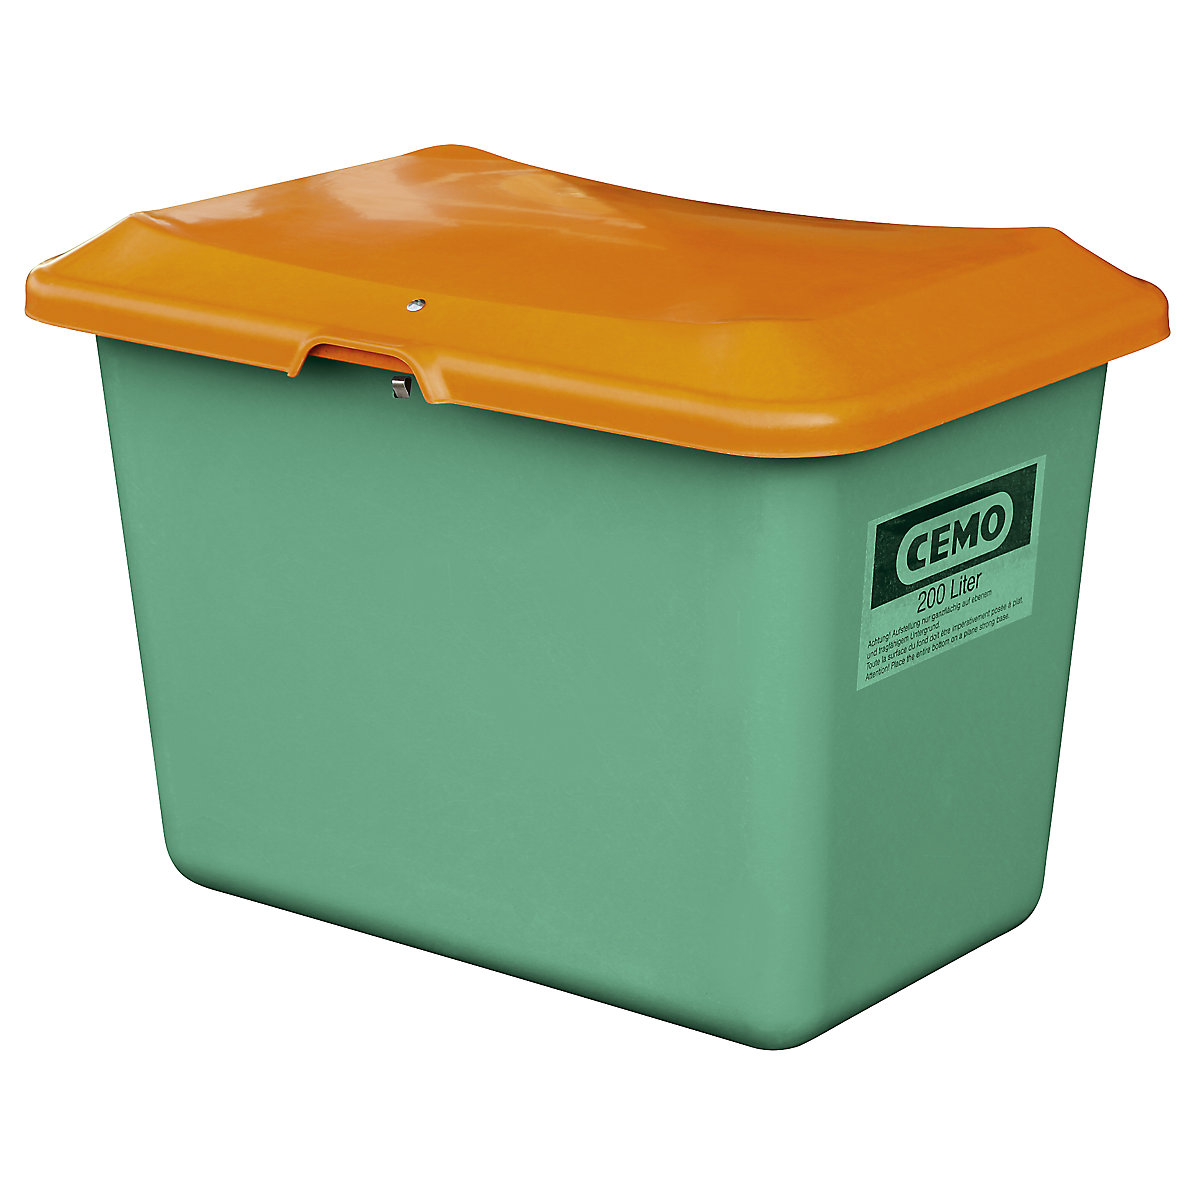 Grit container made of GRP – CEMO, capacity 200 l, without dispenser opening, green container-4